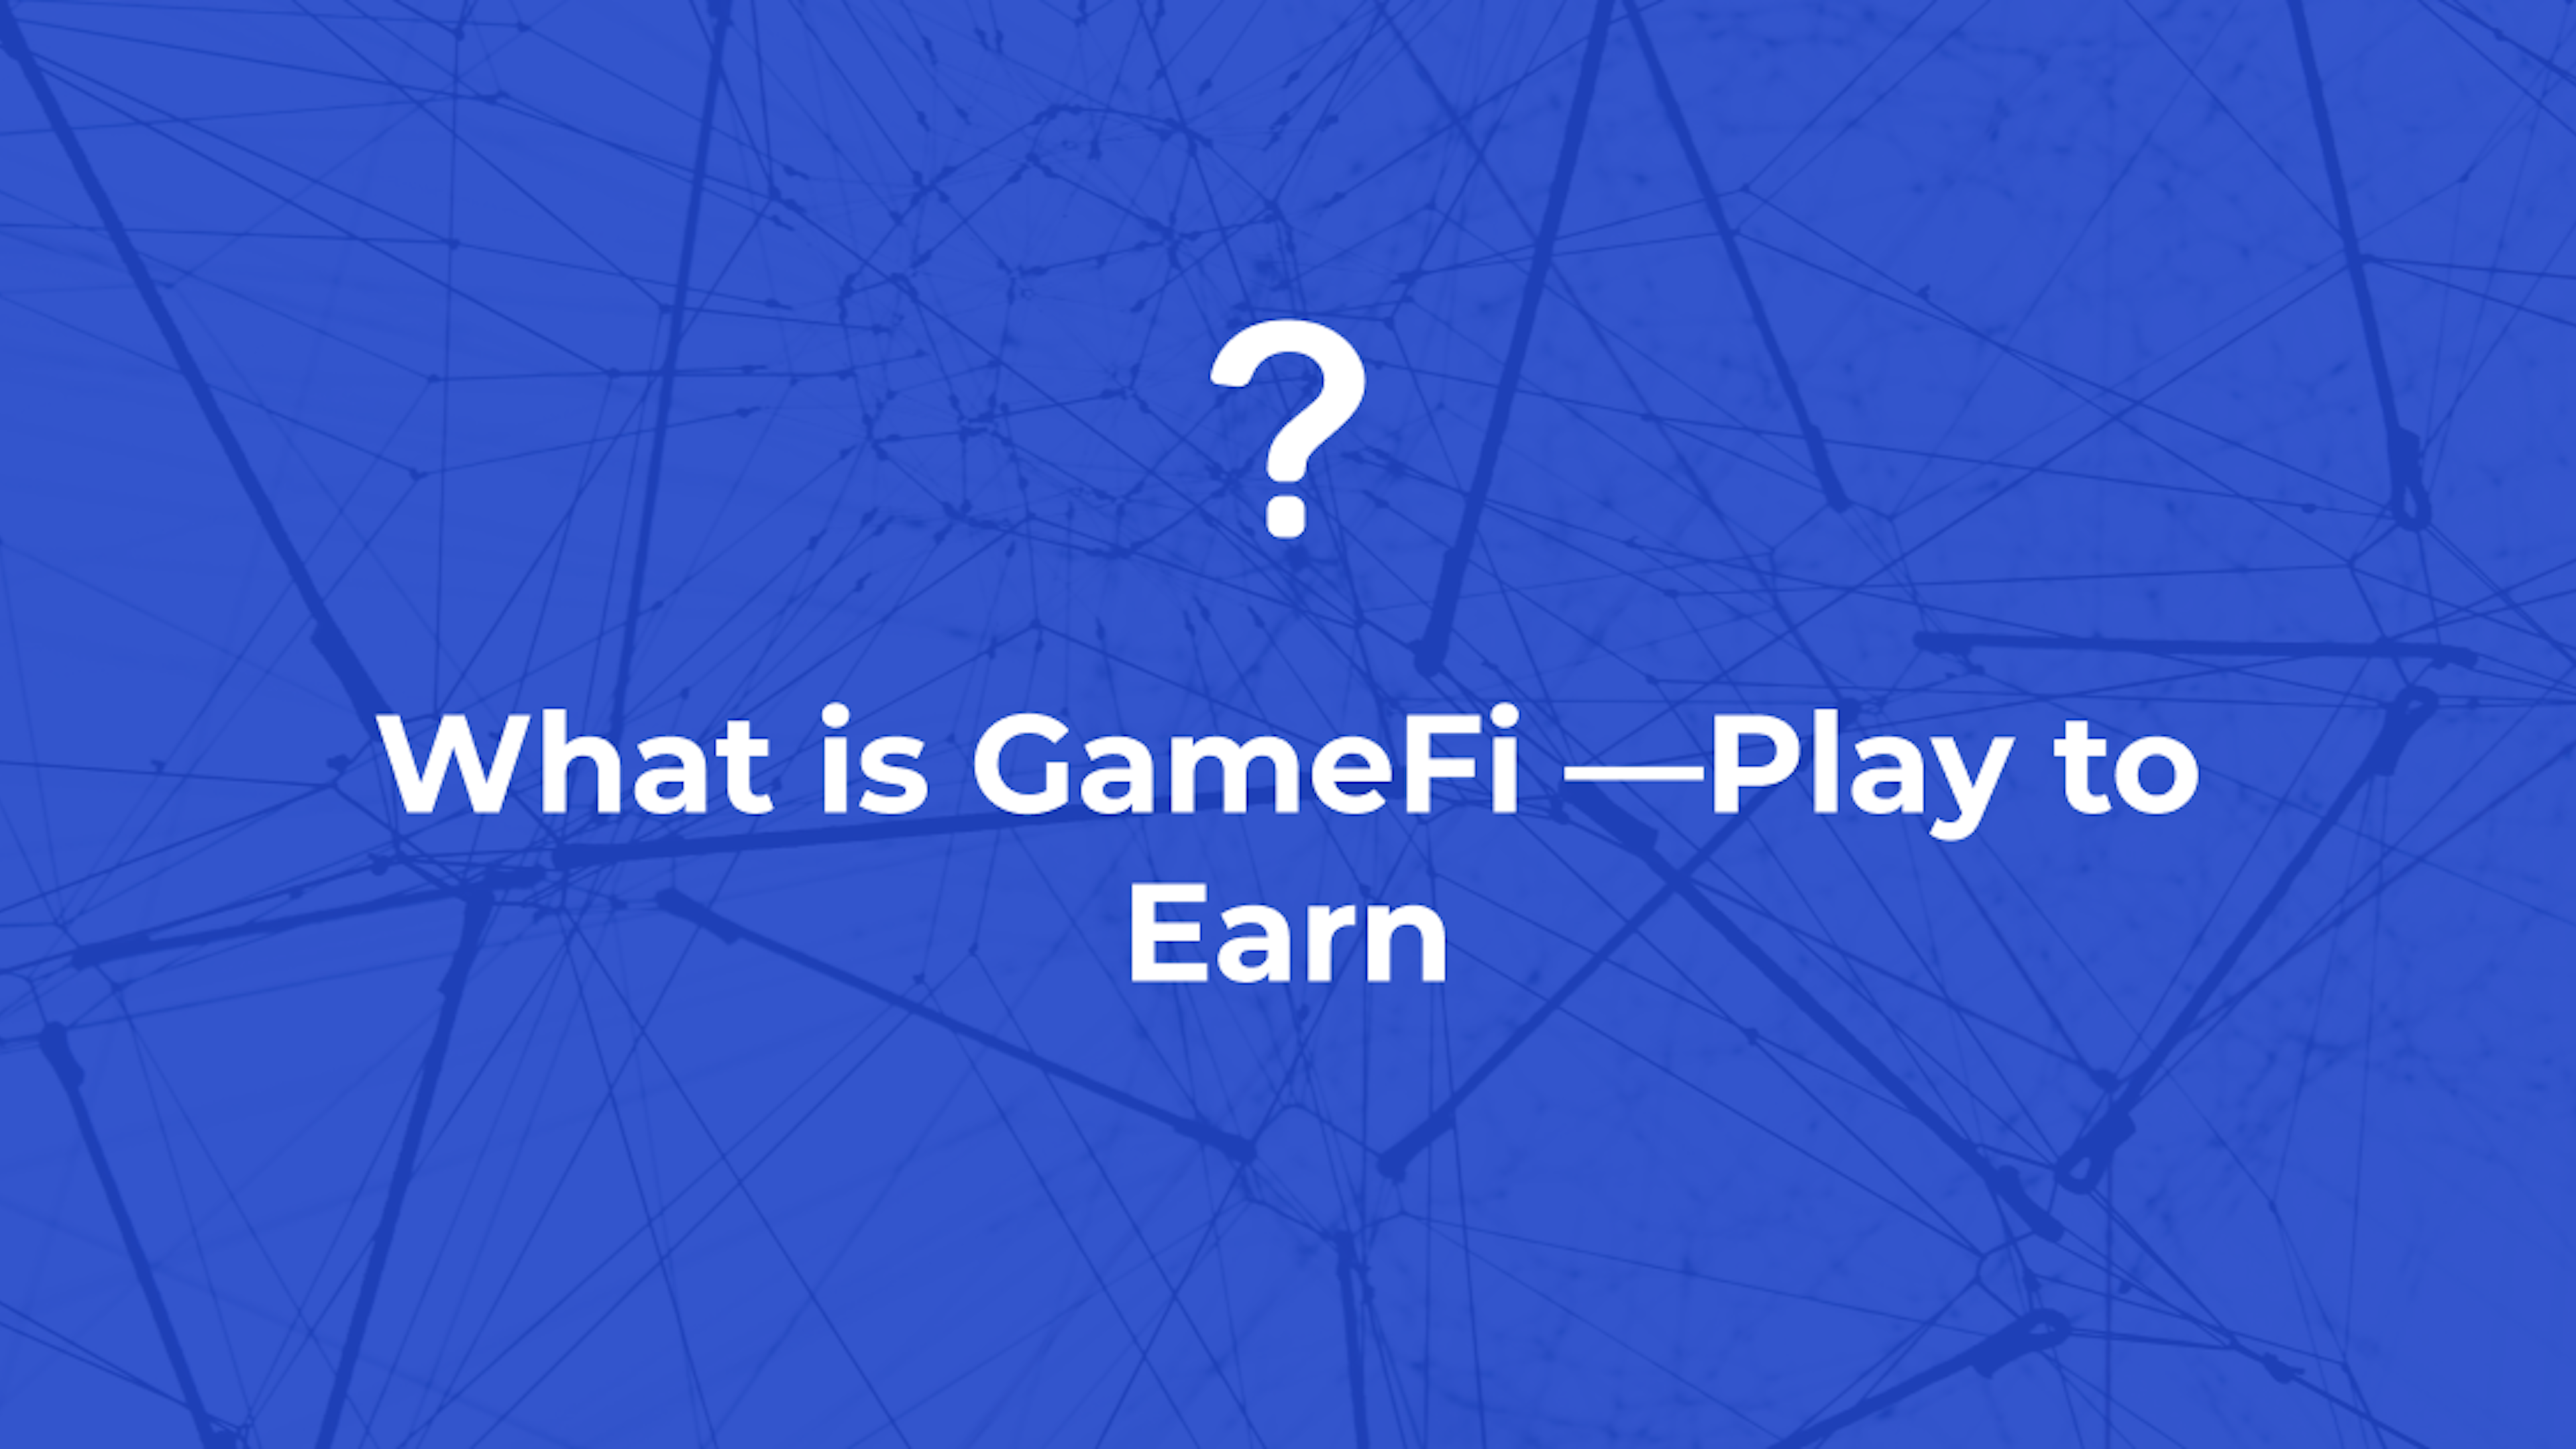 What is GameFi — Play to Earn?